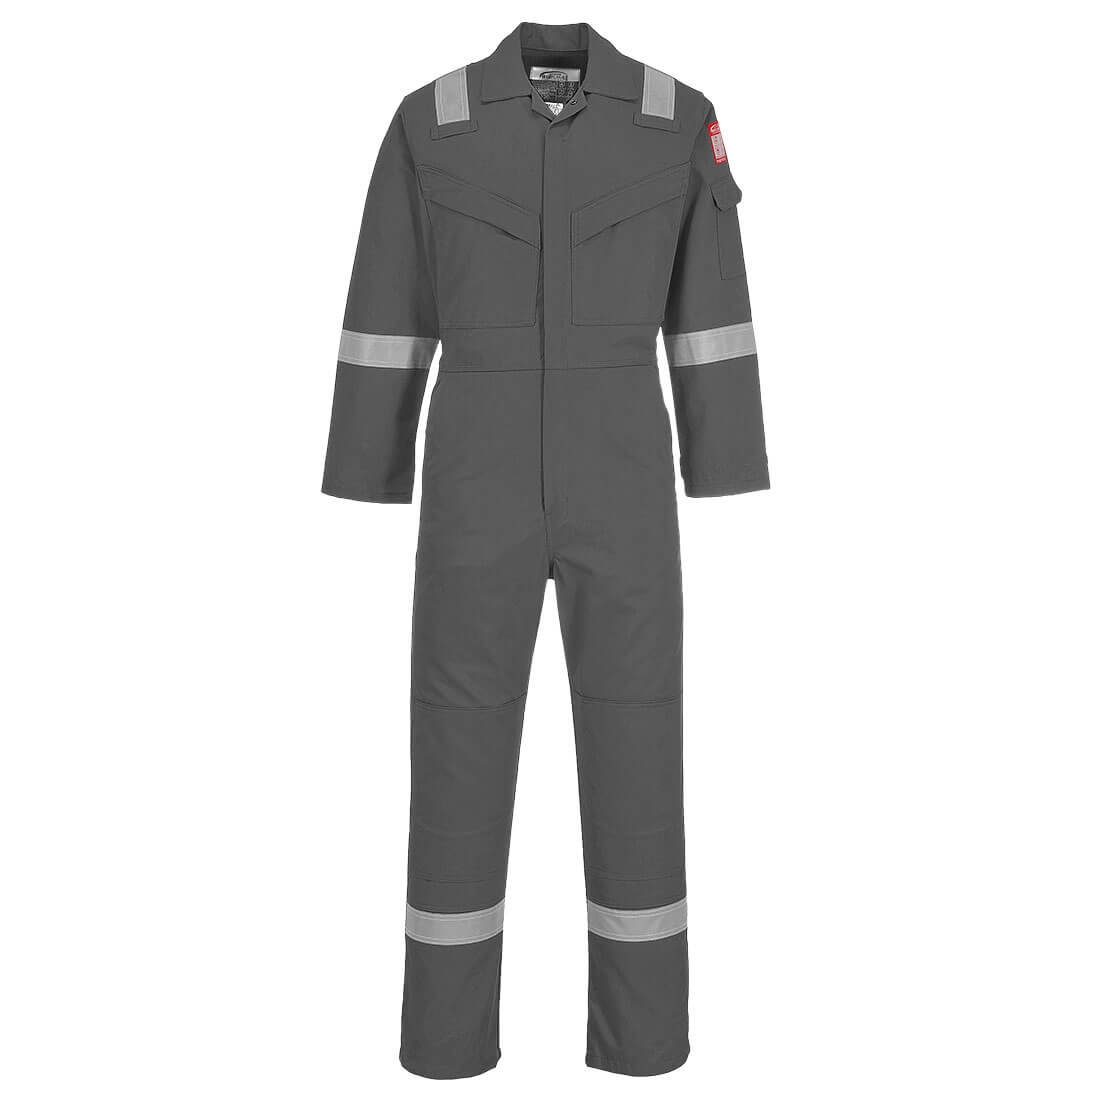 Image of Biz Flame Mens Aberdeen Flame Resistant Antistatic Coverall Grey XL 32"